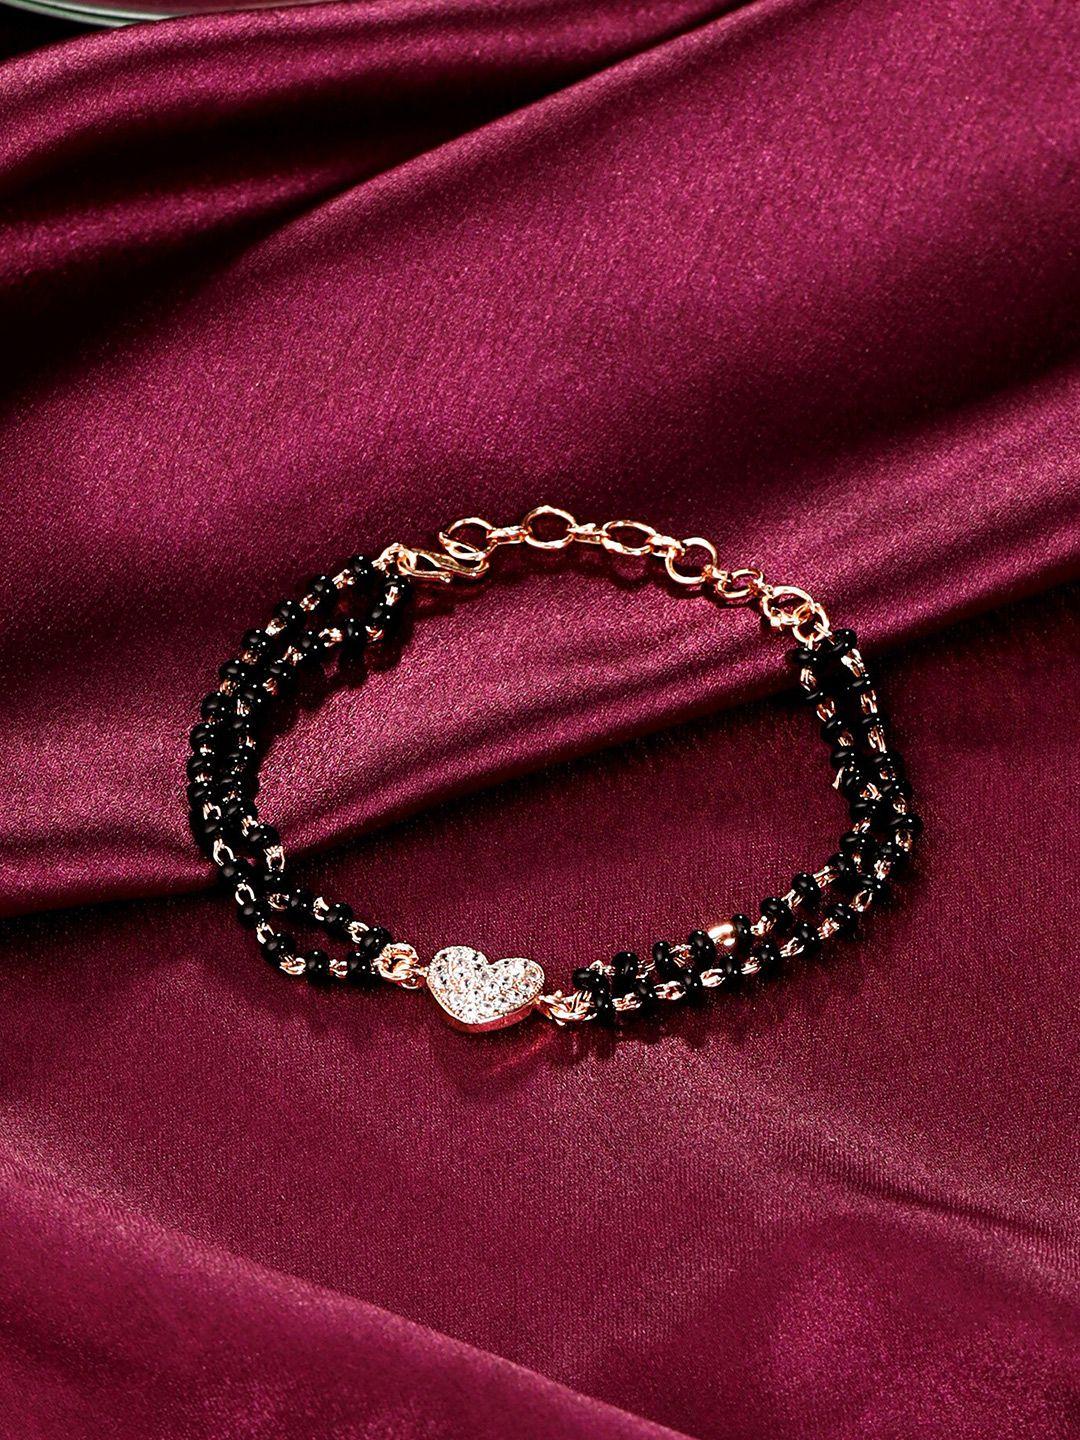 yellow chimes rose gold-plated heart love charmed mangalsutra bracelet